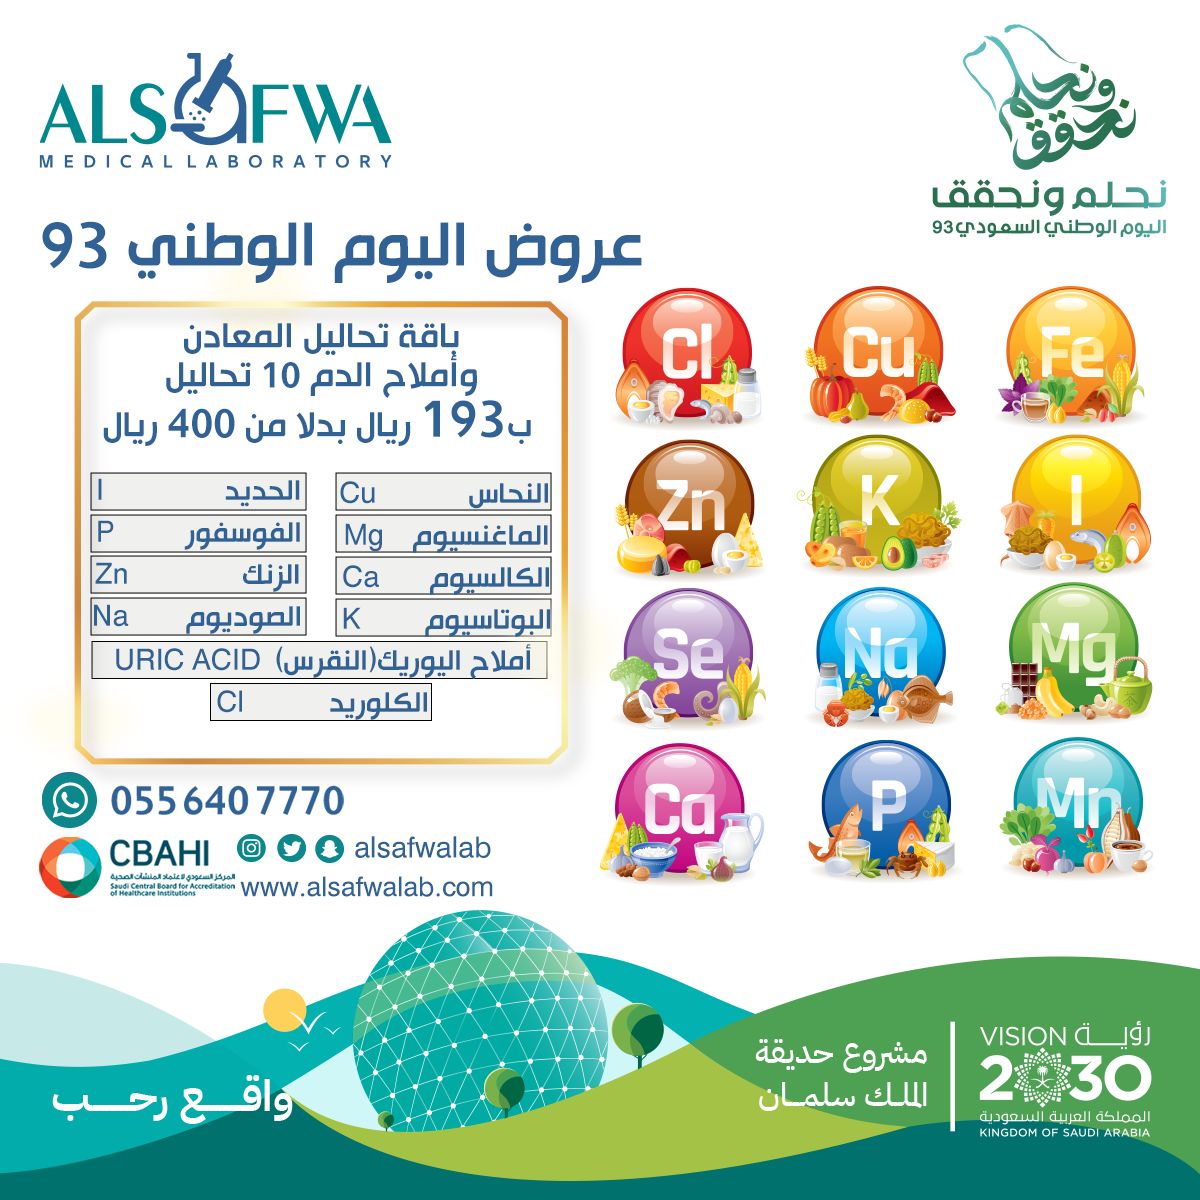 Al-Safwa Laboratories discounts for the National Day 1445